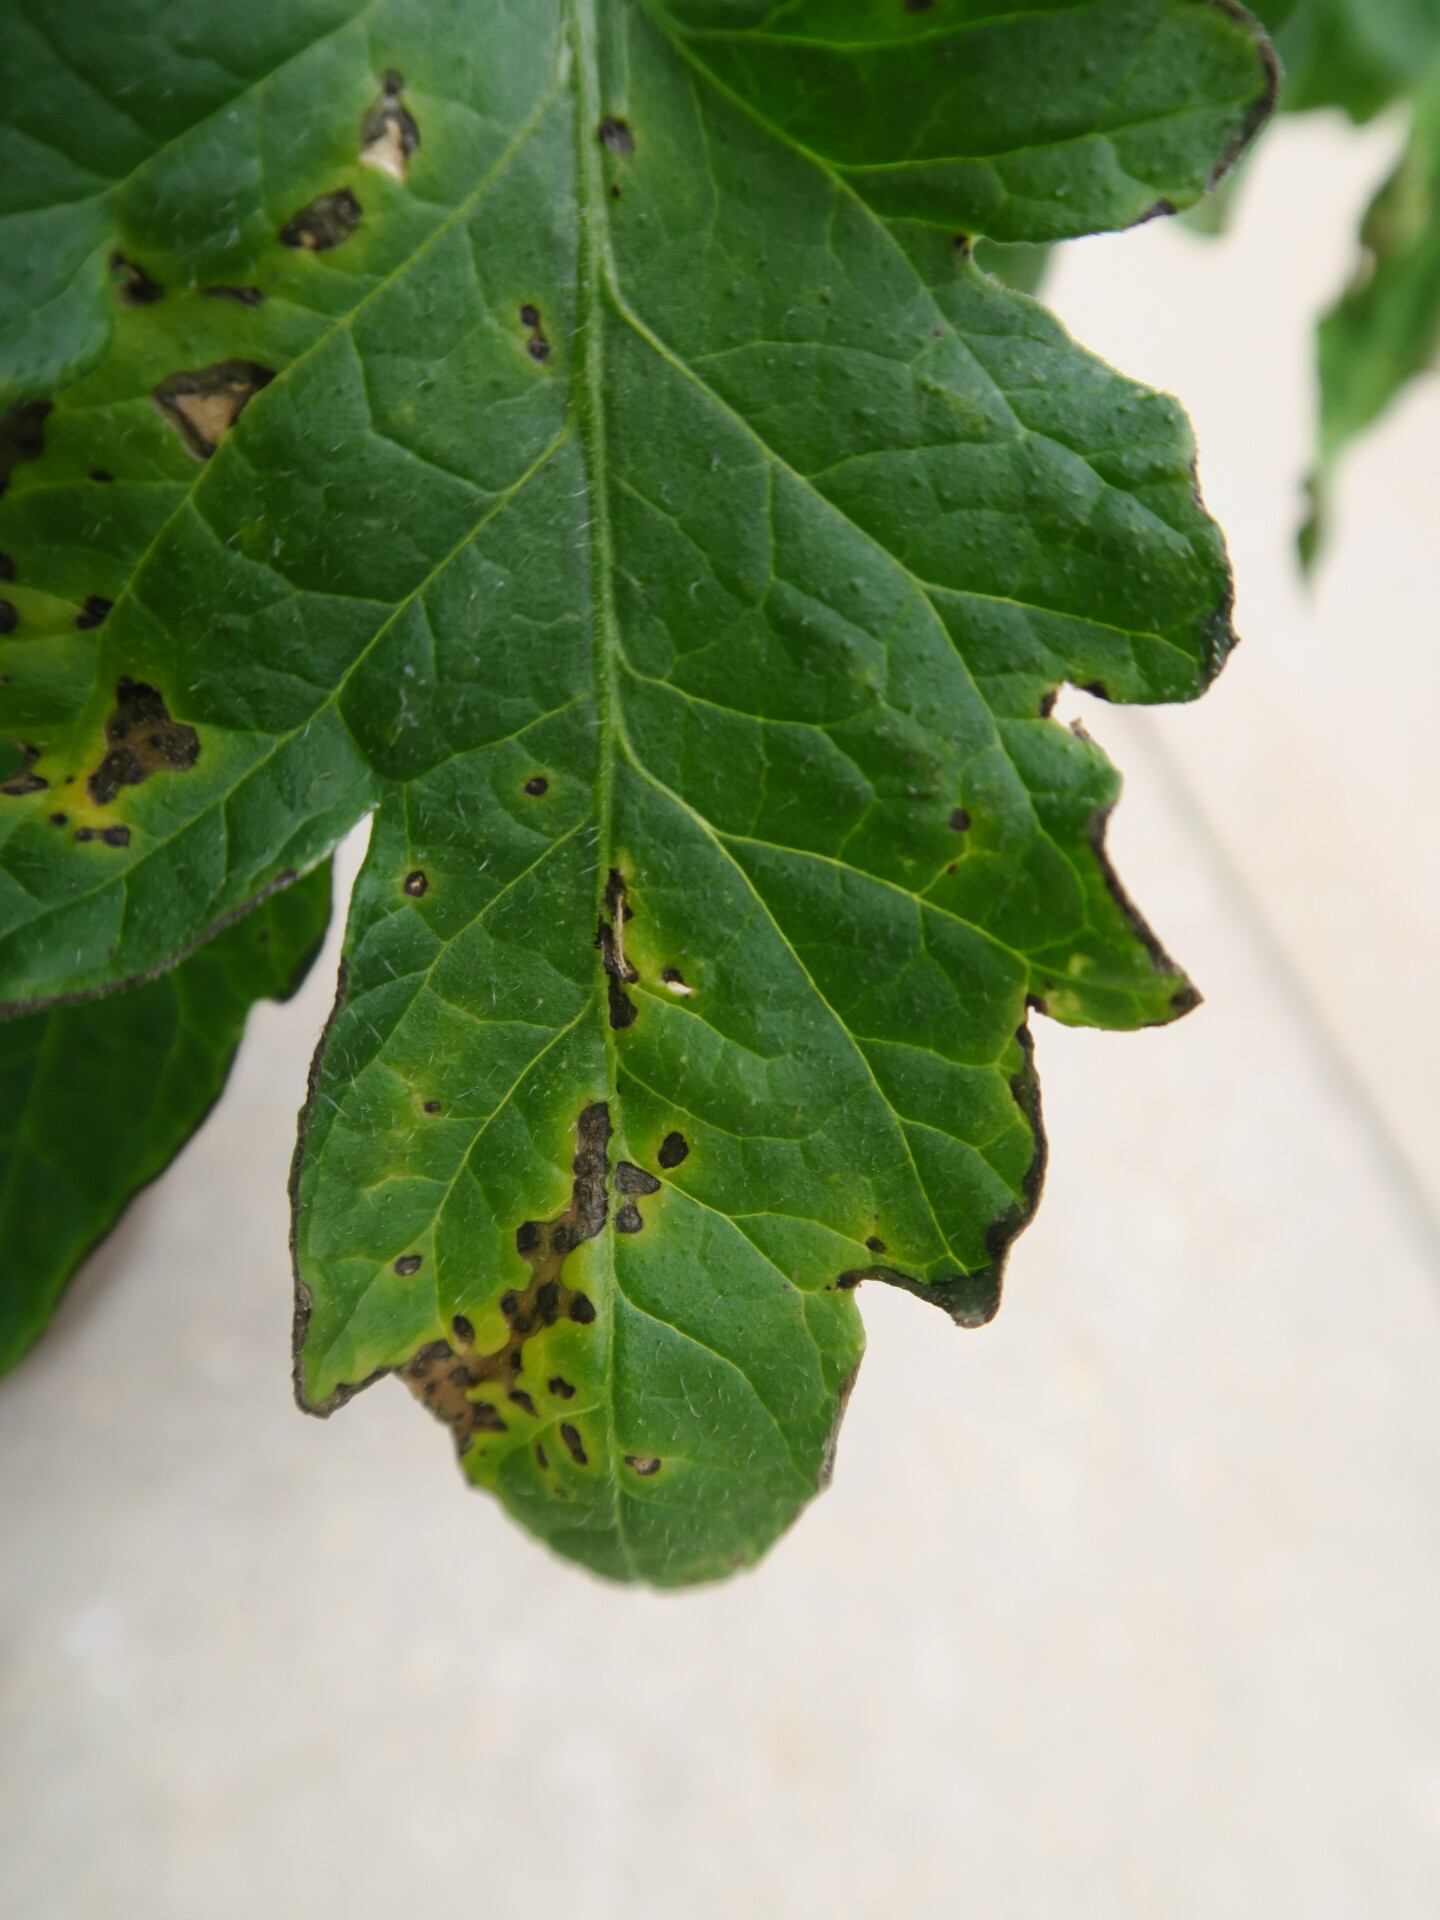 Figure 3. Lesions of bacterial speck of tomato on leaf.